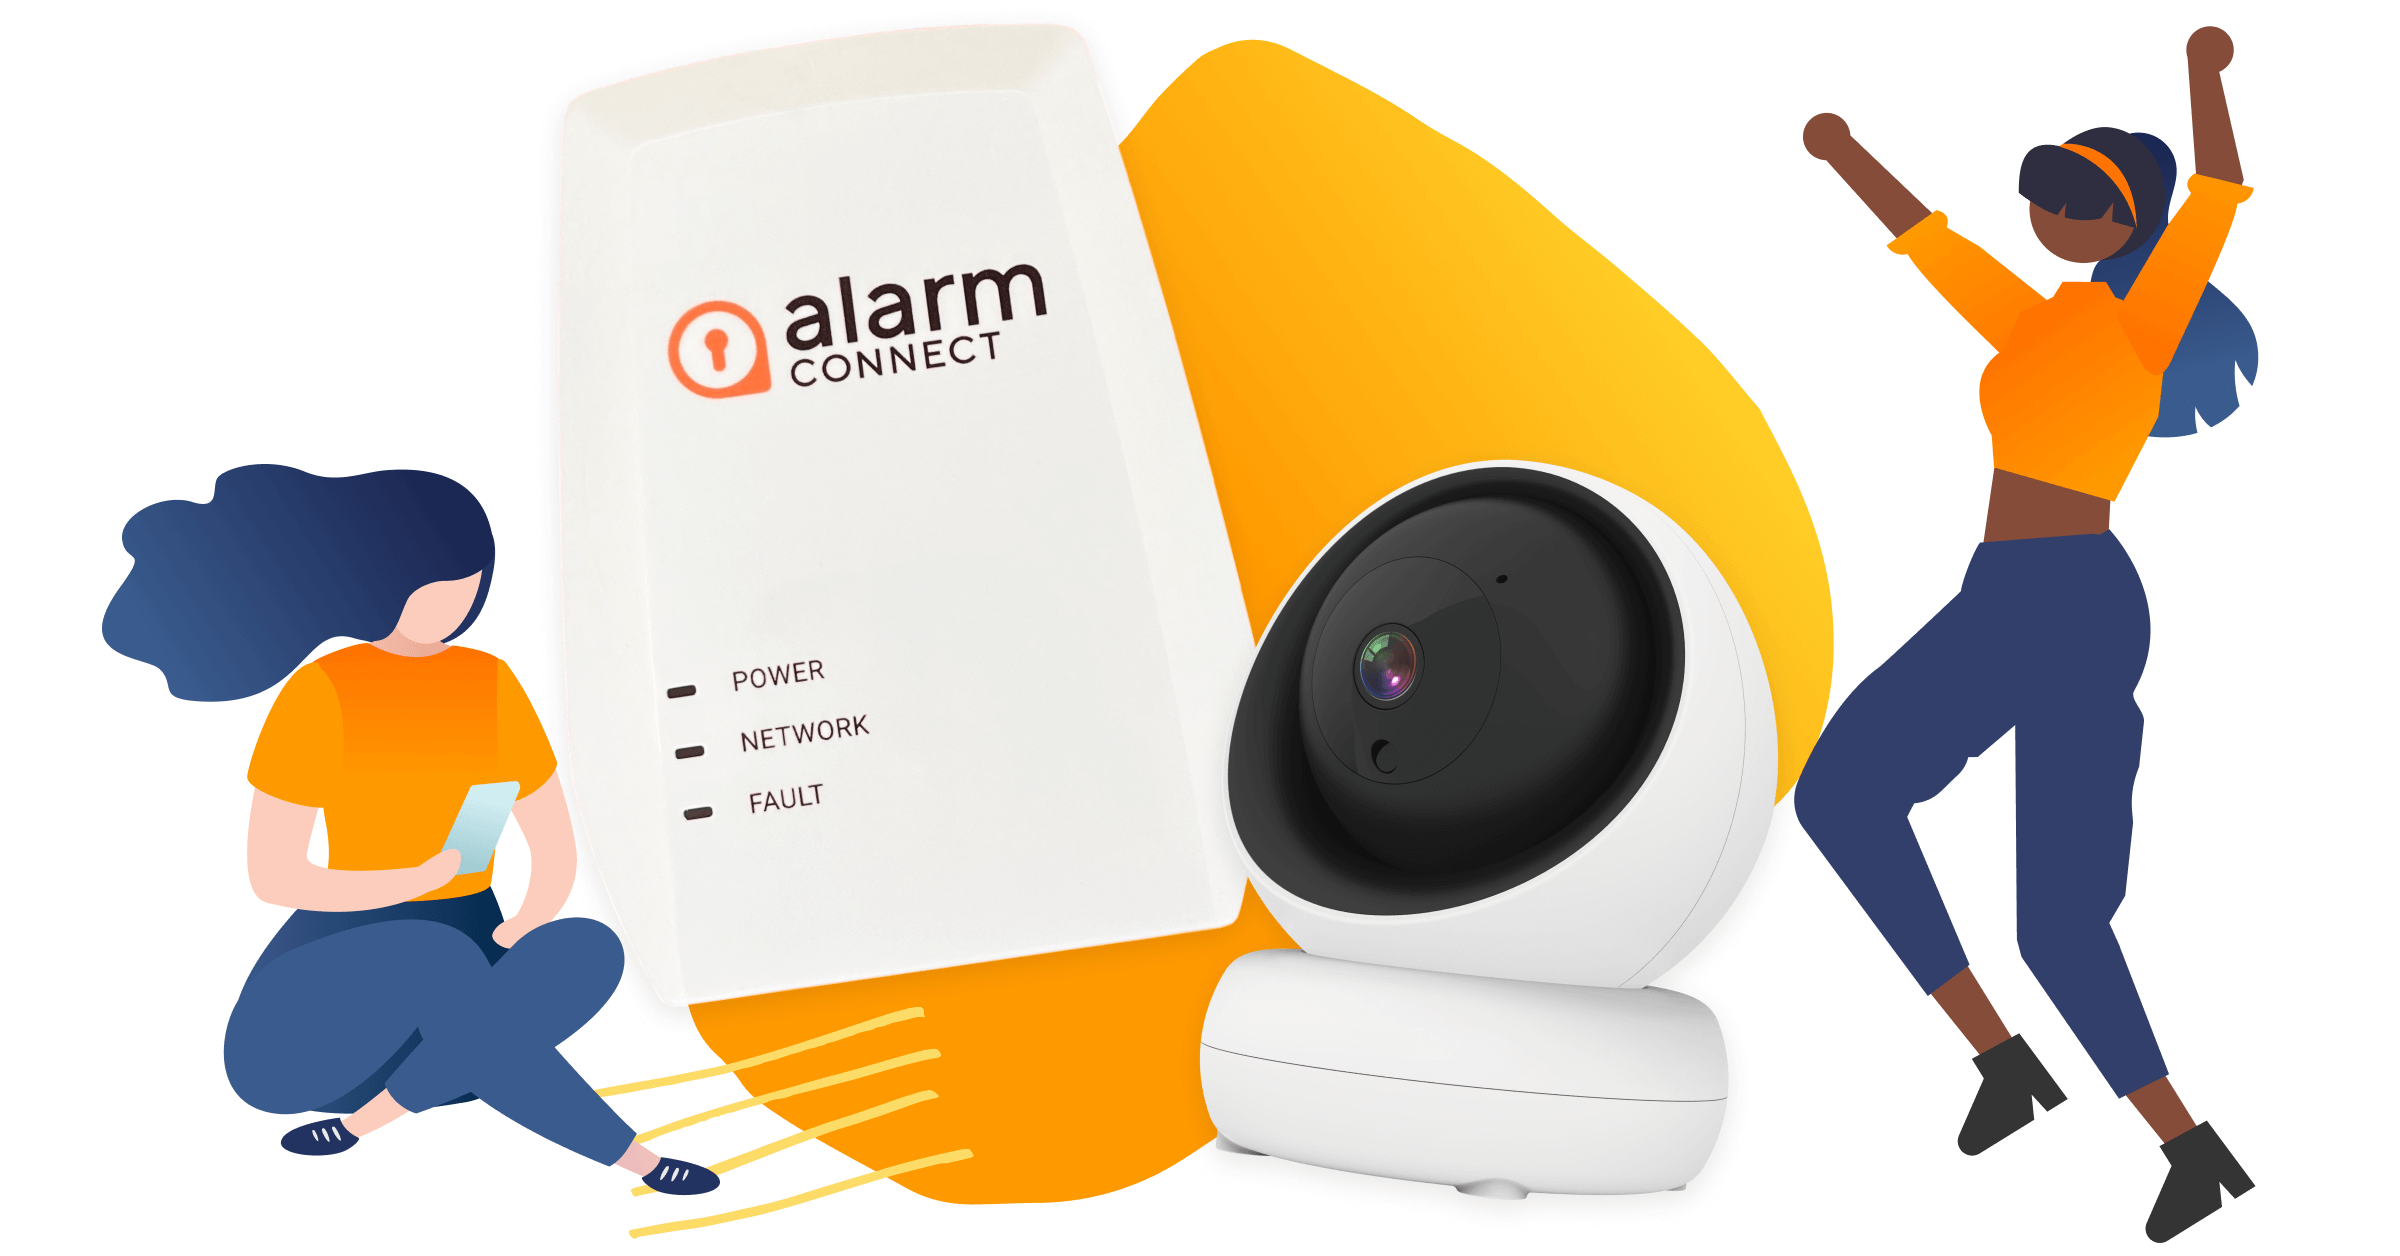 Sensor Networks launches Alarm Connect home-security monitoring solution